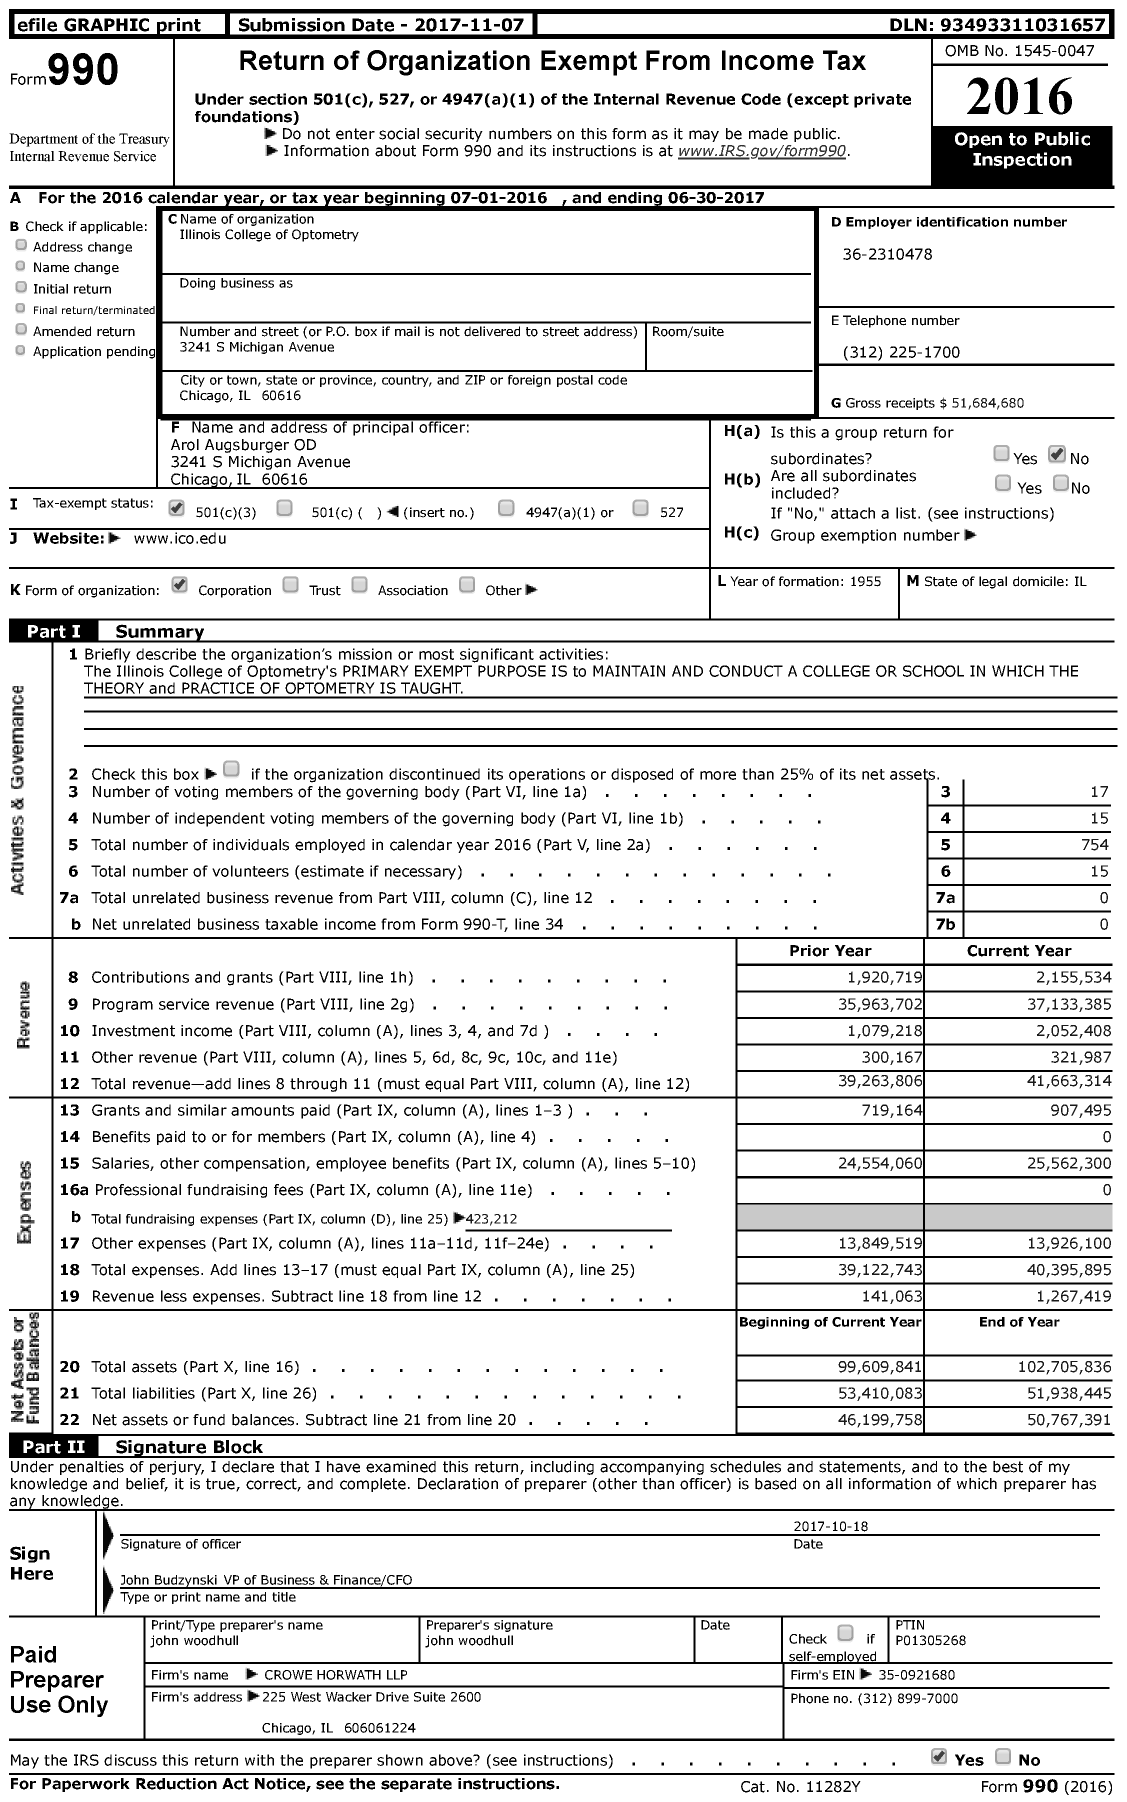 Image of first page of 2016 Form 990 for Illinois College of Optometry (ICO)